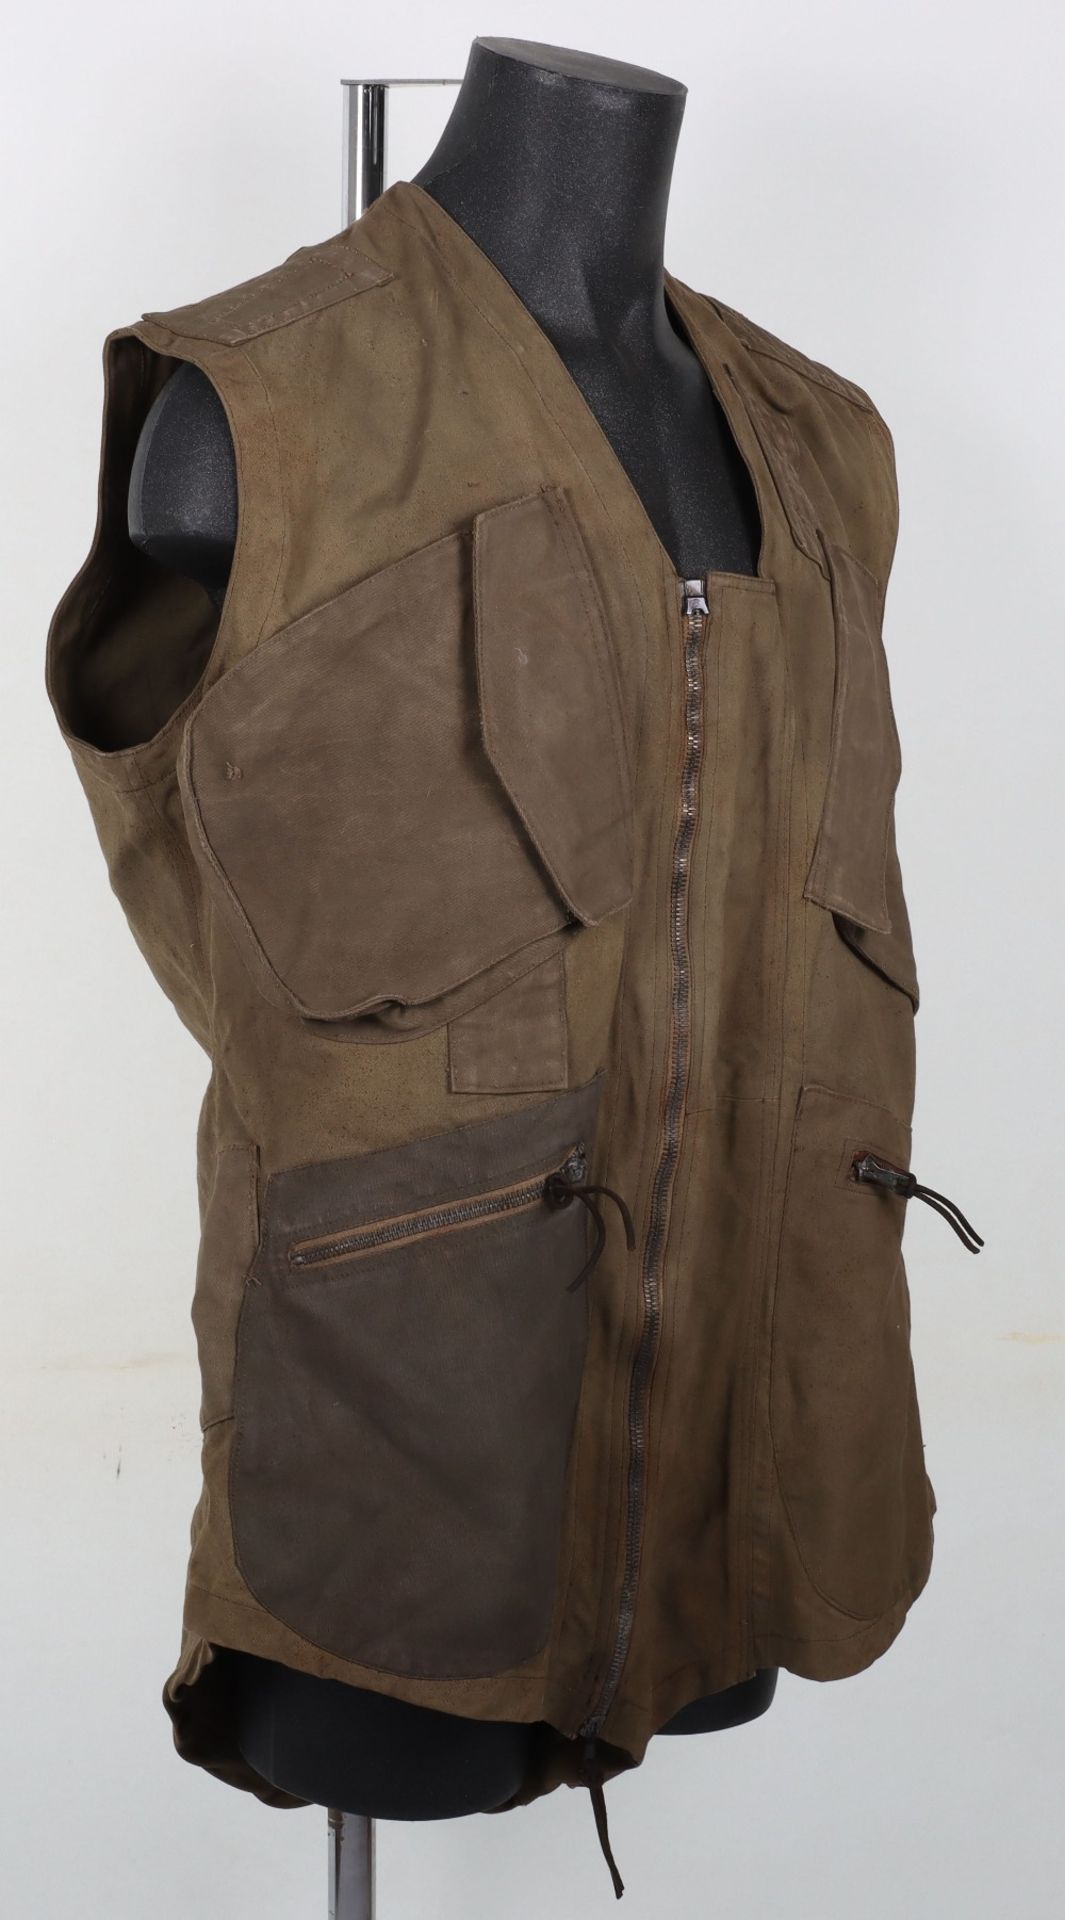 Rare Modified Irvin Jump Jacket Smock Used by the Polish Airborne Forces - Image 8 of 15